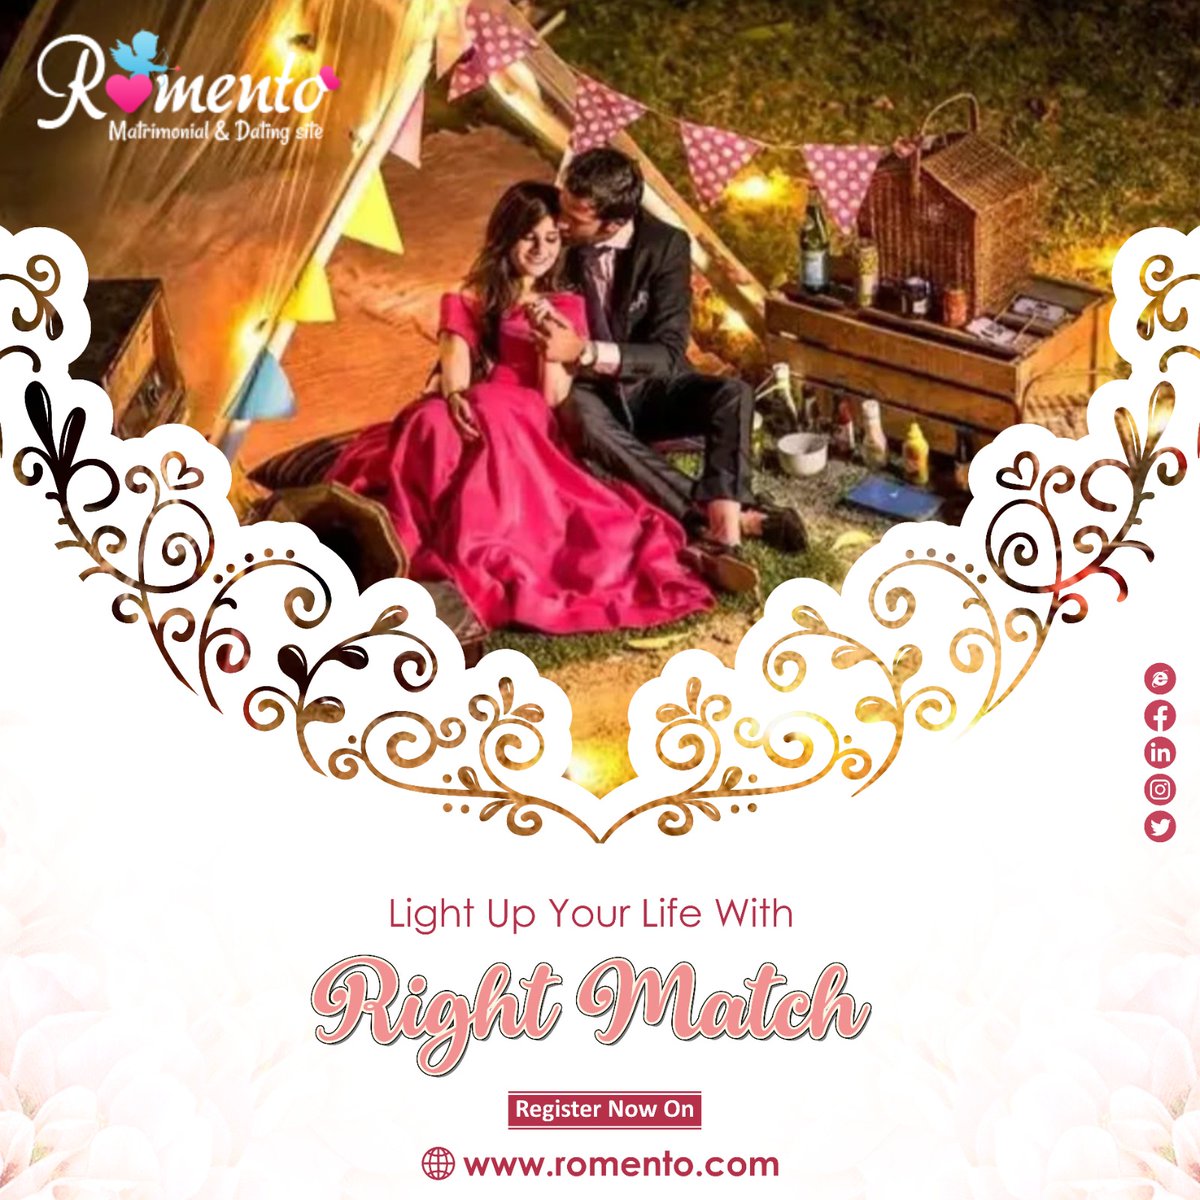 💌 𝗟𝗼𝘃𝗲 𝗶𝘀 𝗶𝗻 𝘁𝗵𝗲 𝗔𝗶𝗿 𝘄𝗶𝘁𝗵 𝗥𝗼𝗺𝗲𝗻𝘁𝗼! 💌

👫 Discover a world of possibilities and connect with genuine, like-minded individuals on India's top matrimonial website, Romento: romento.com !!!

#matrimonialsite #matrimonial #romento #love #loveyou